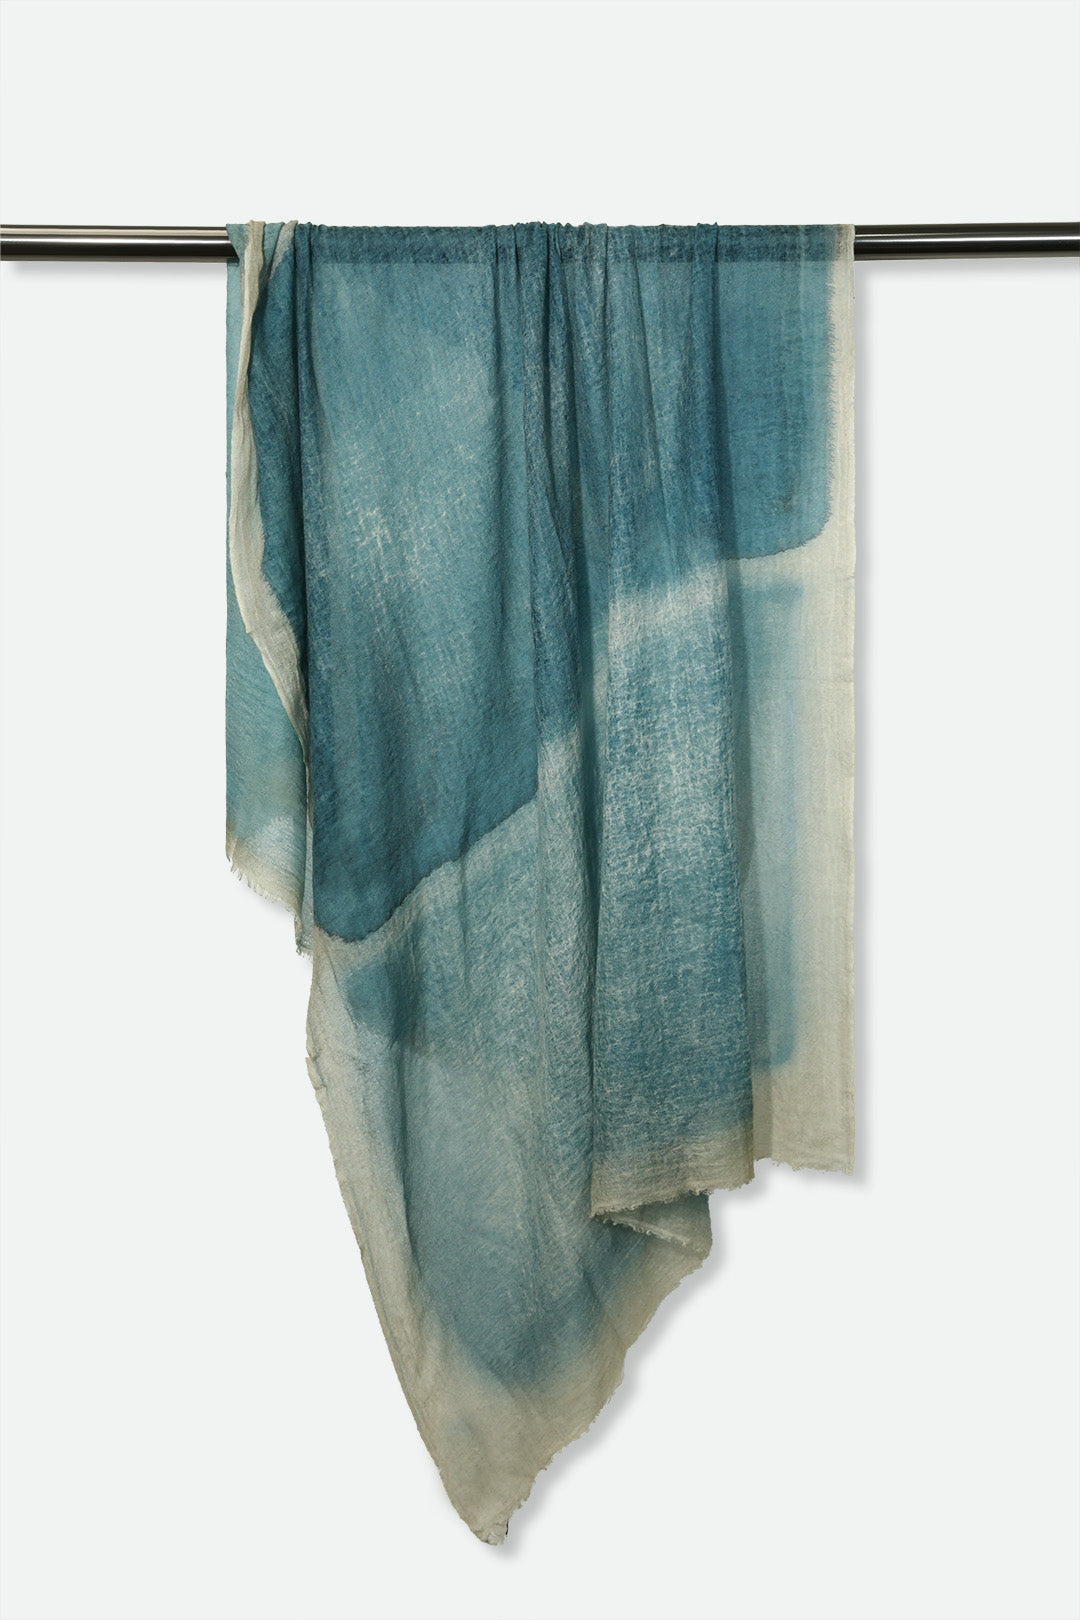 SEAFOAM SCARF IN HAND DYED CASHMERE